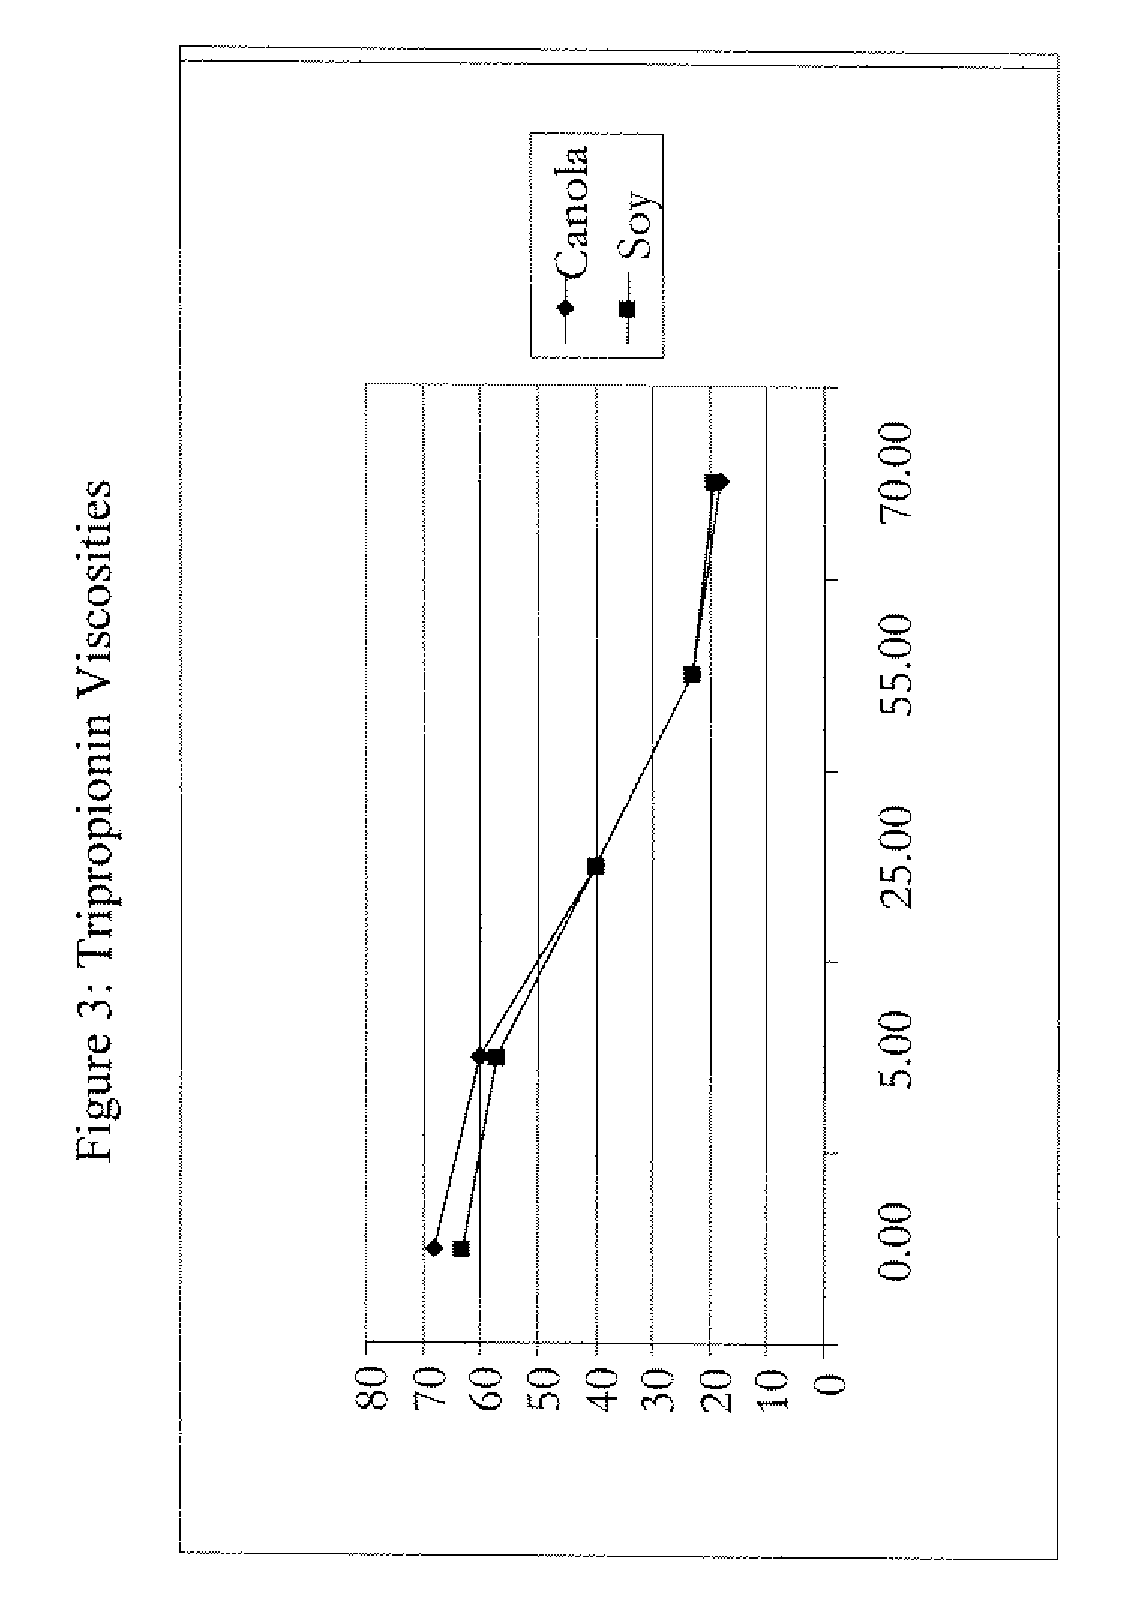 Controlled viscosity oil composition and method of making